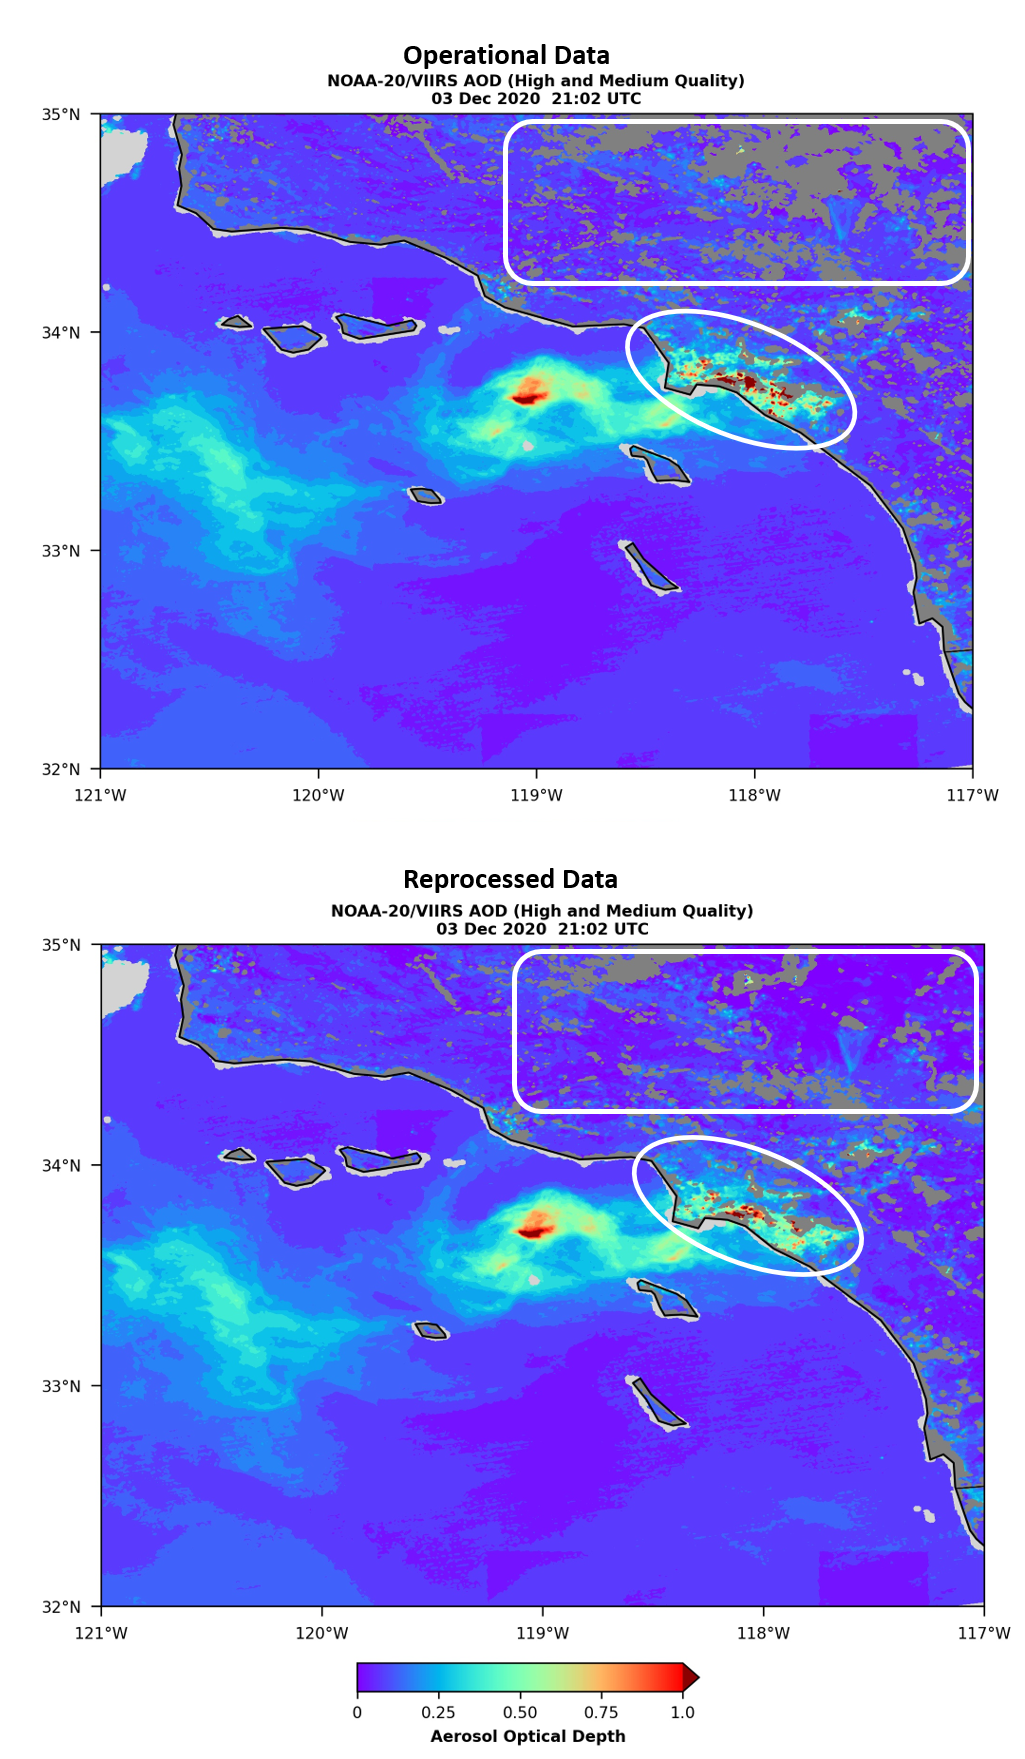 VIIRS Operational vs Reprocessed AOD Images - December 3, 2020